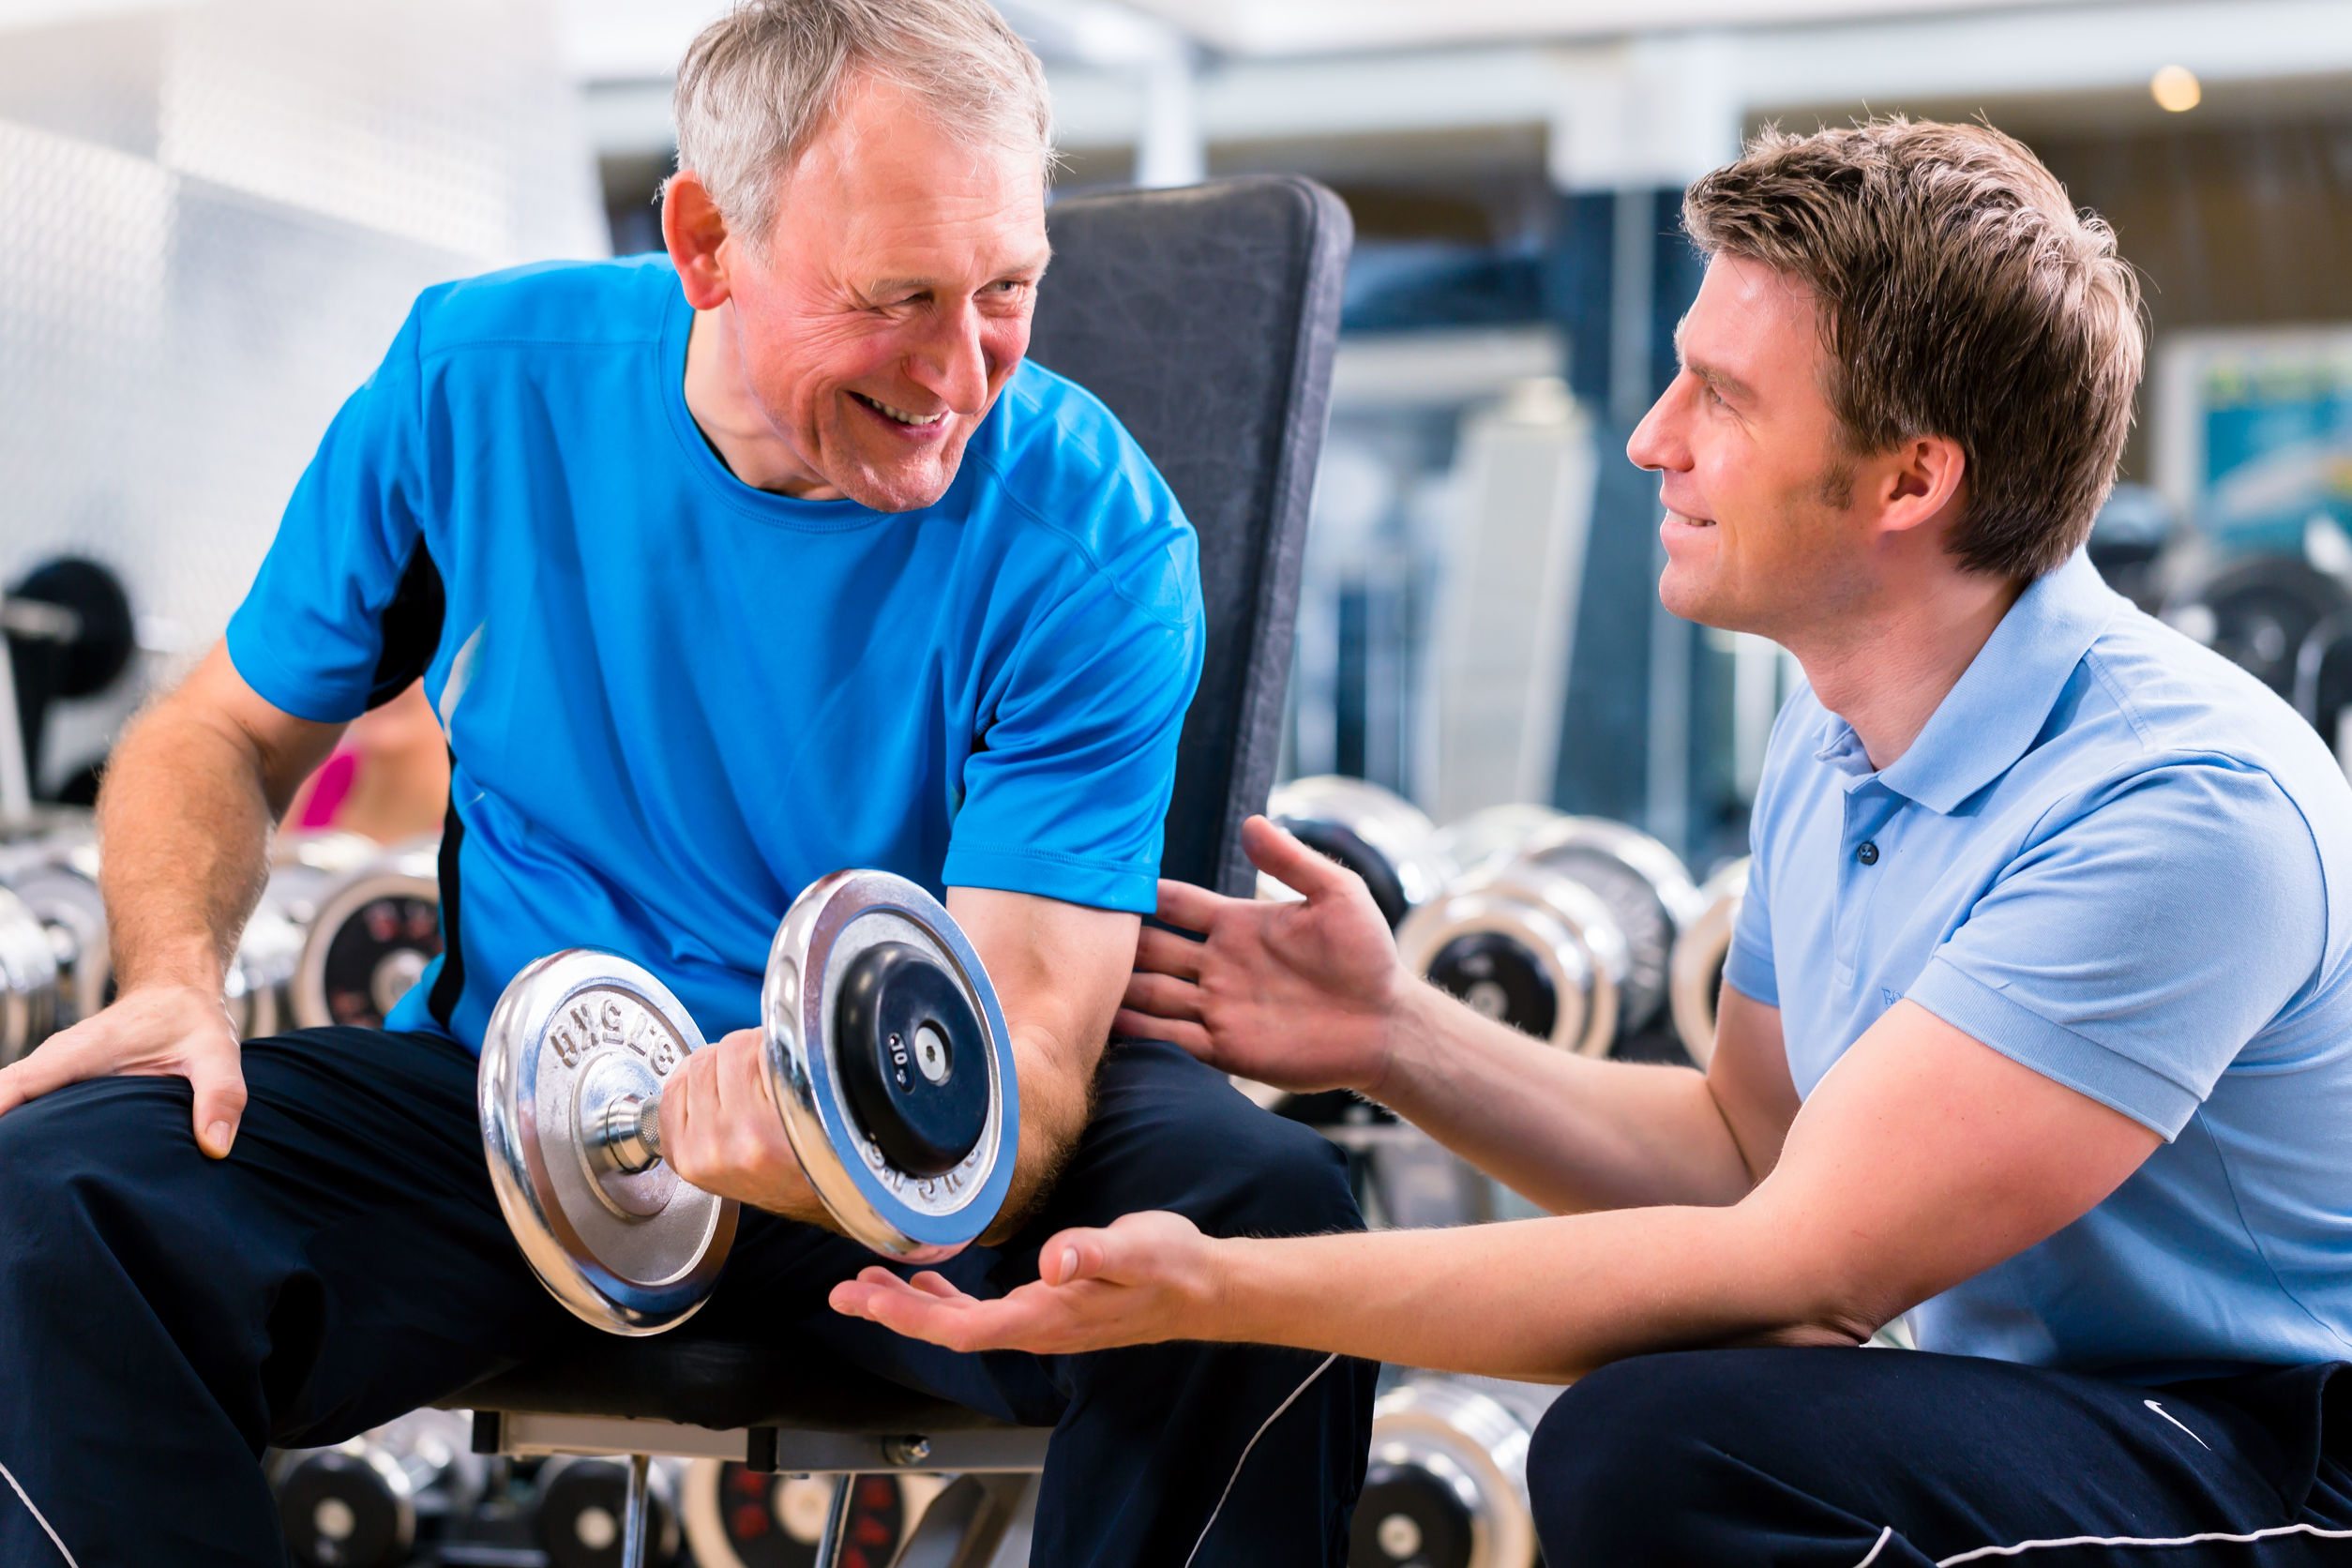 Level 3 Exercise for Older Adults